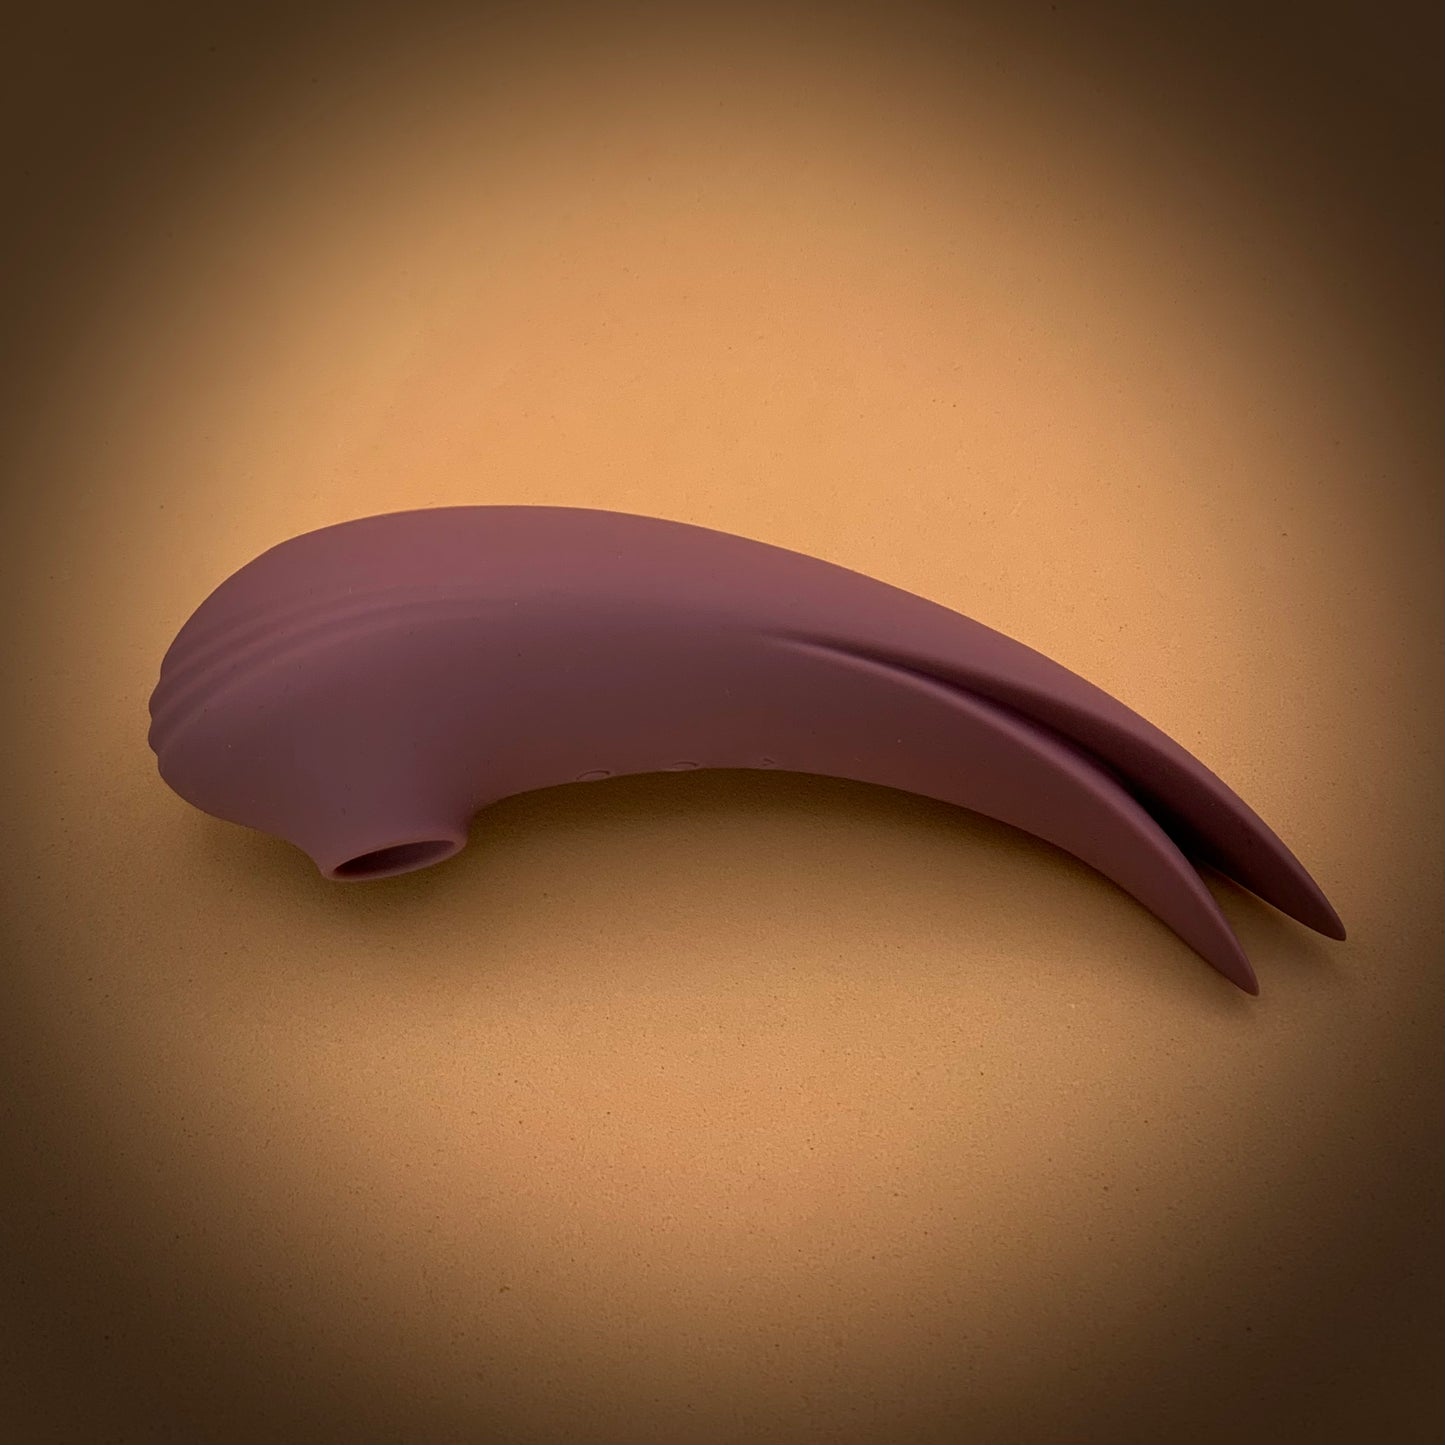 Dual action suction an vibrator toy with curved body and fin-like tail in dusty rose colour